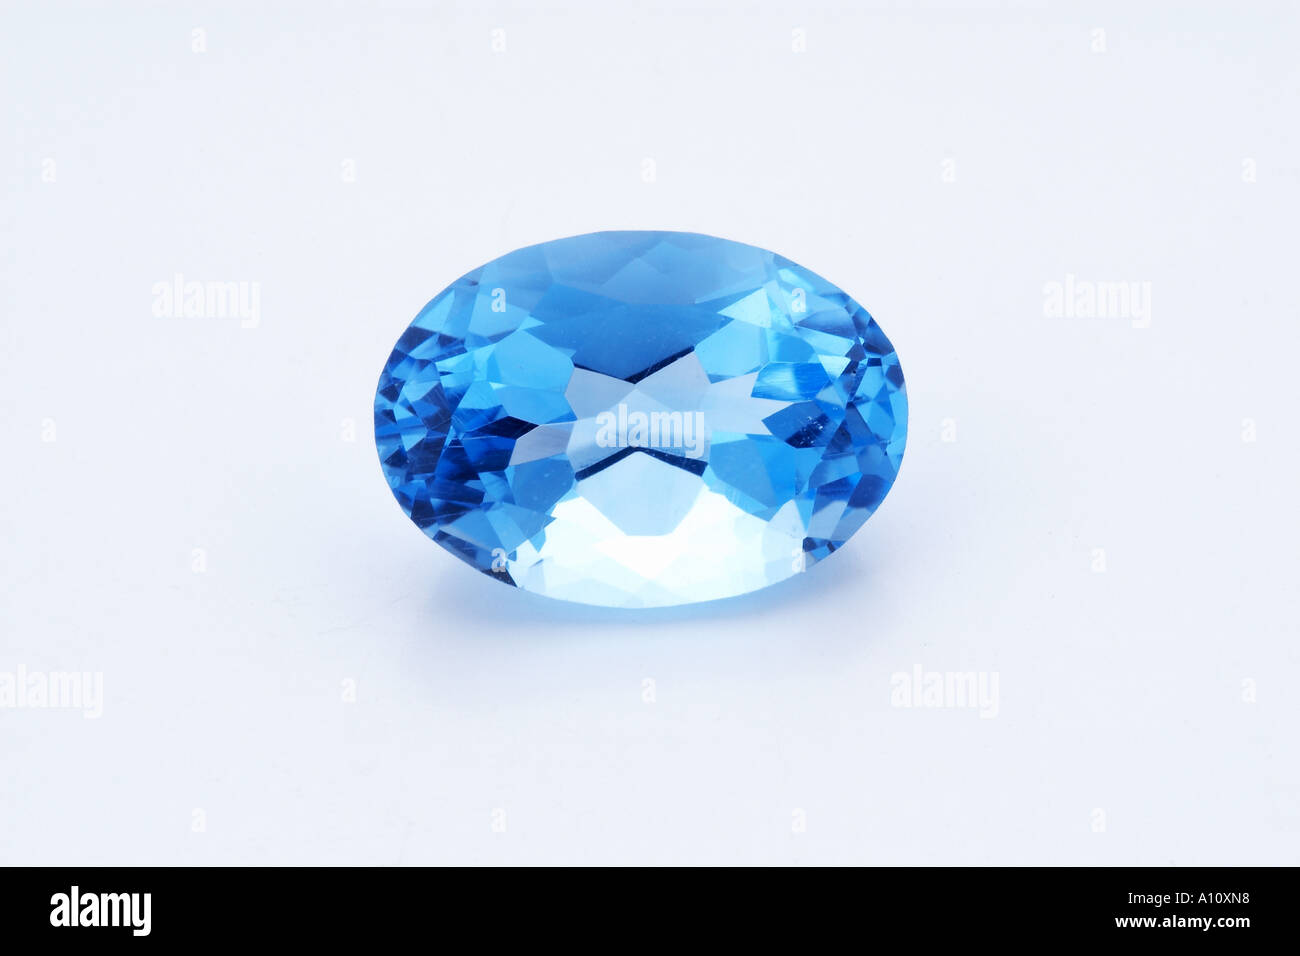 One piece of Blue Quartz Semi Precious Stone oval shape on white paper shining cut facet like crystal expensive value envy Stock Photo